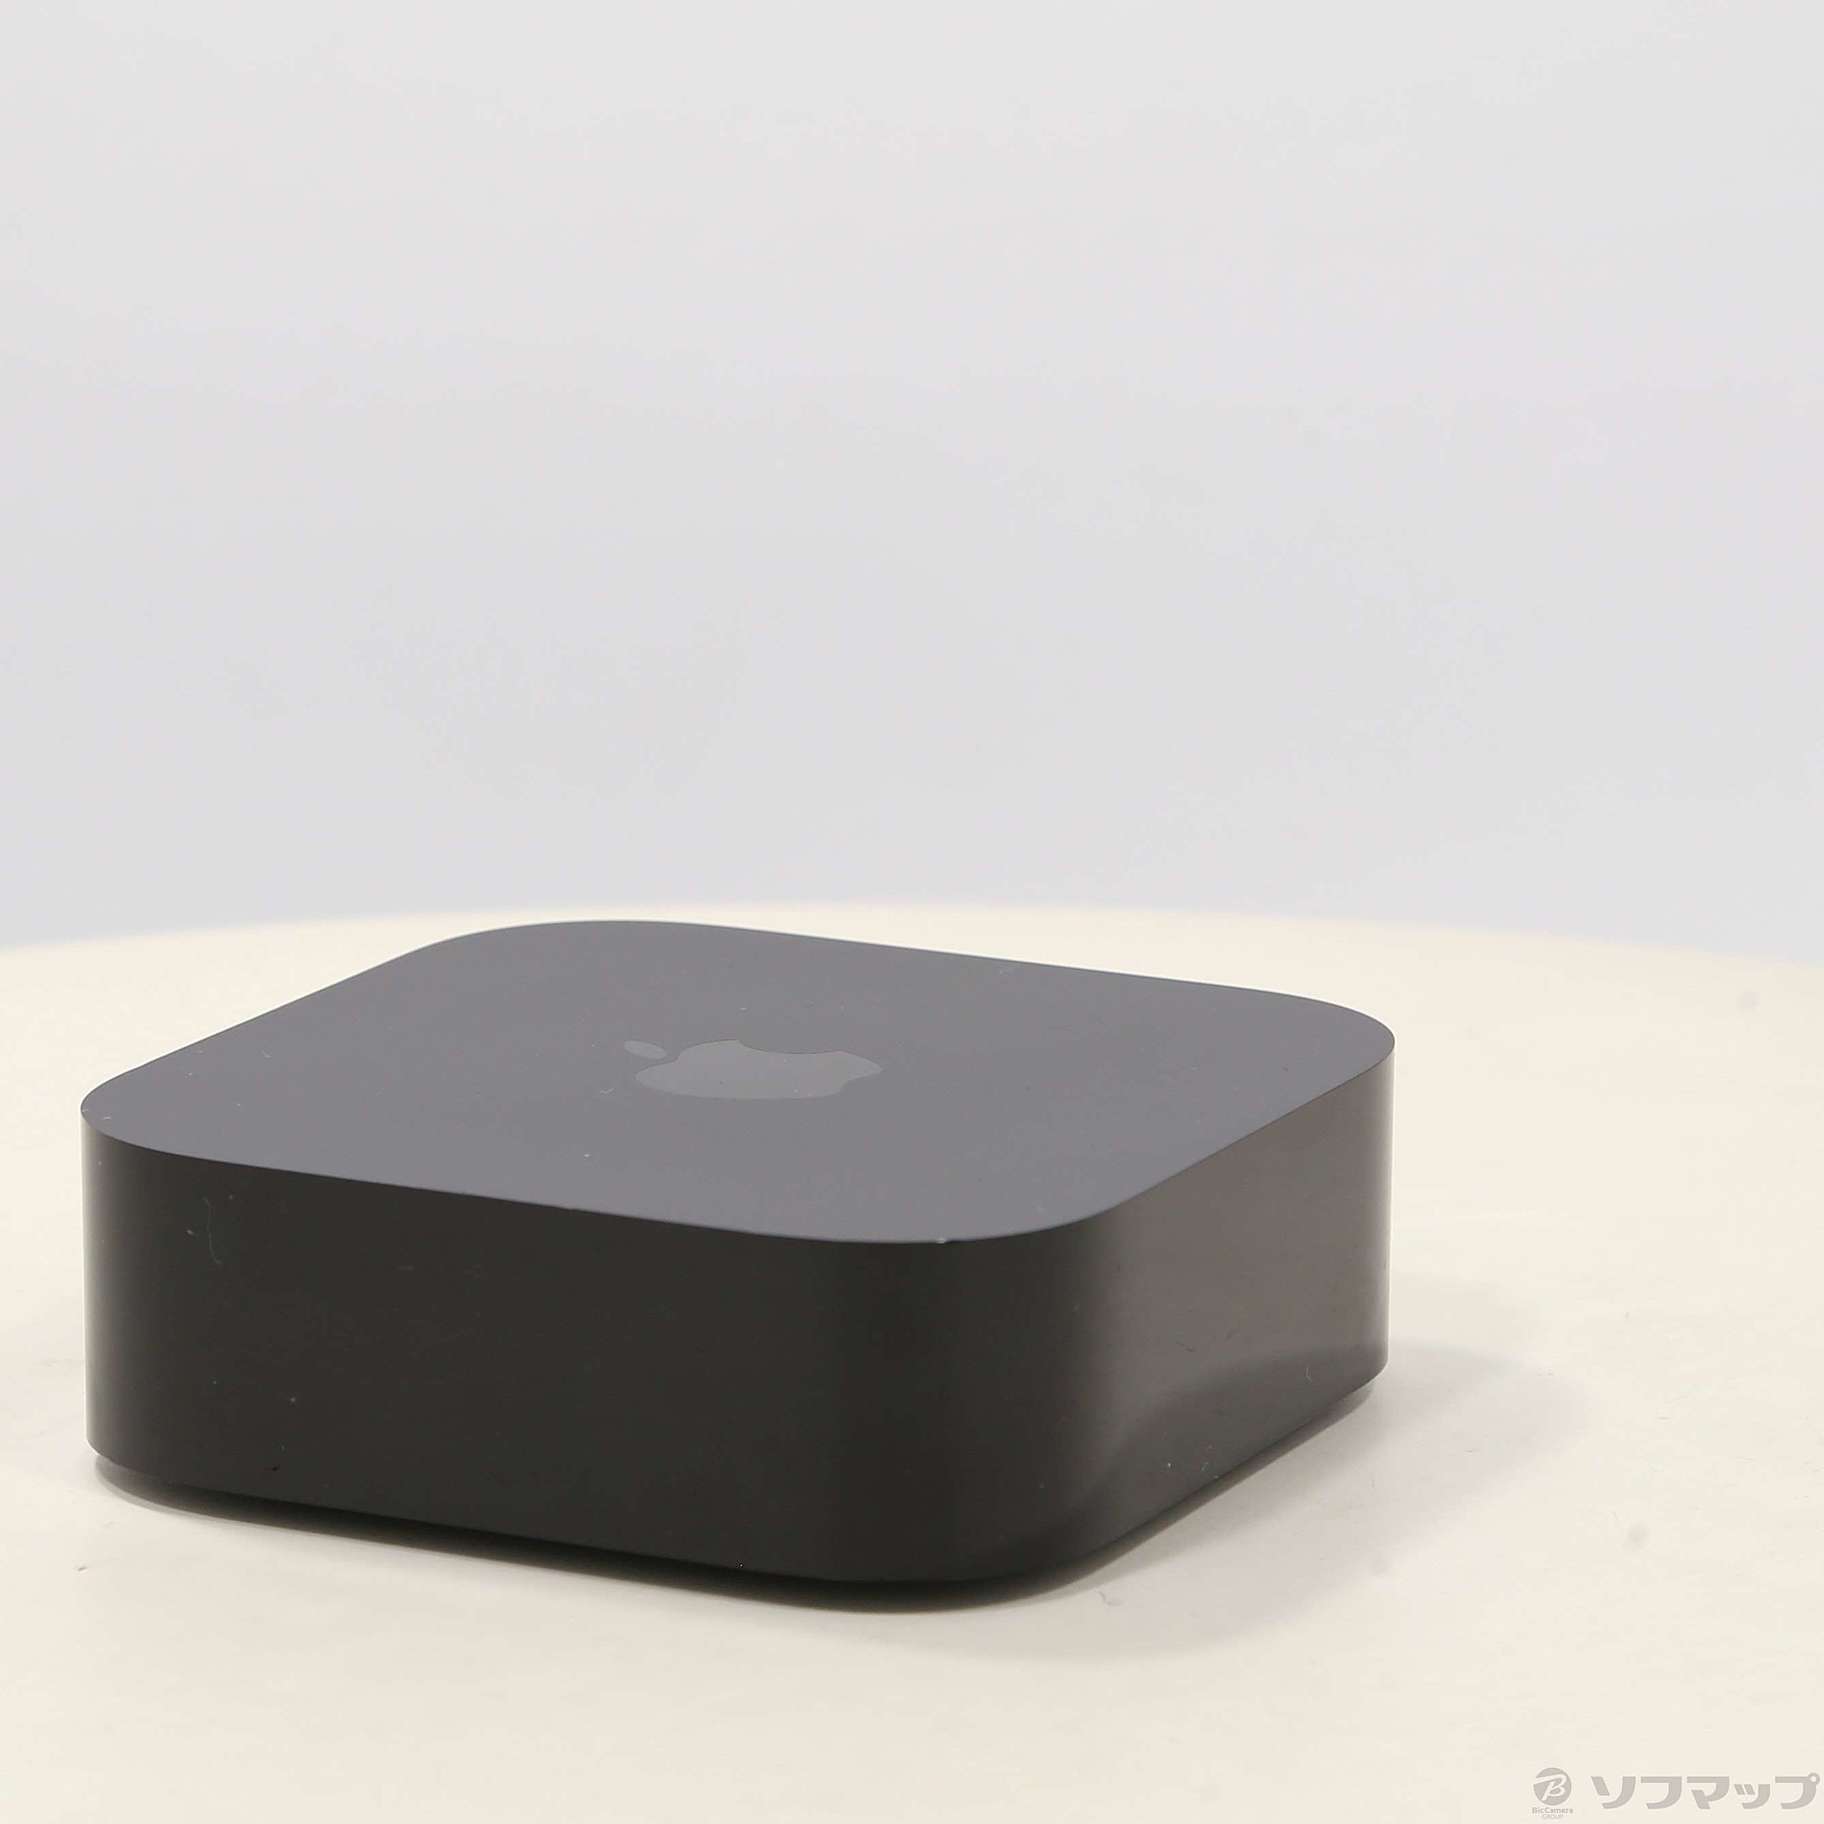 中古】Apple TV 4K 第3世代 64GB Wi-Fiモデル MN873J／A